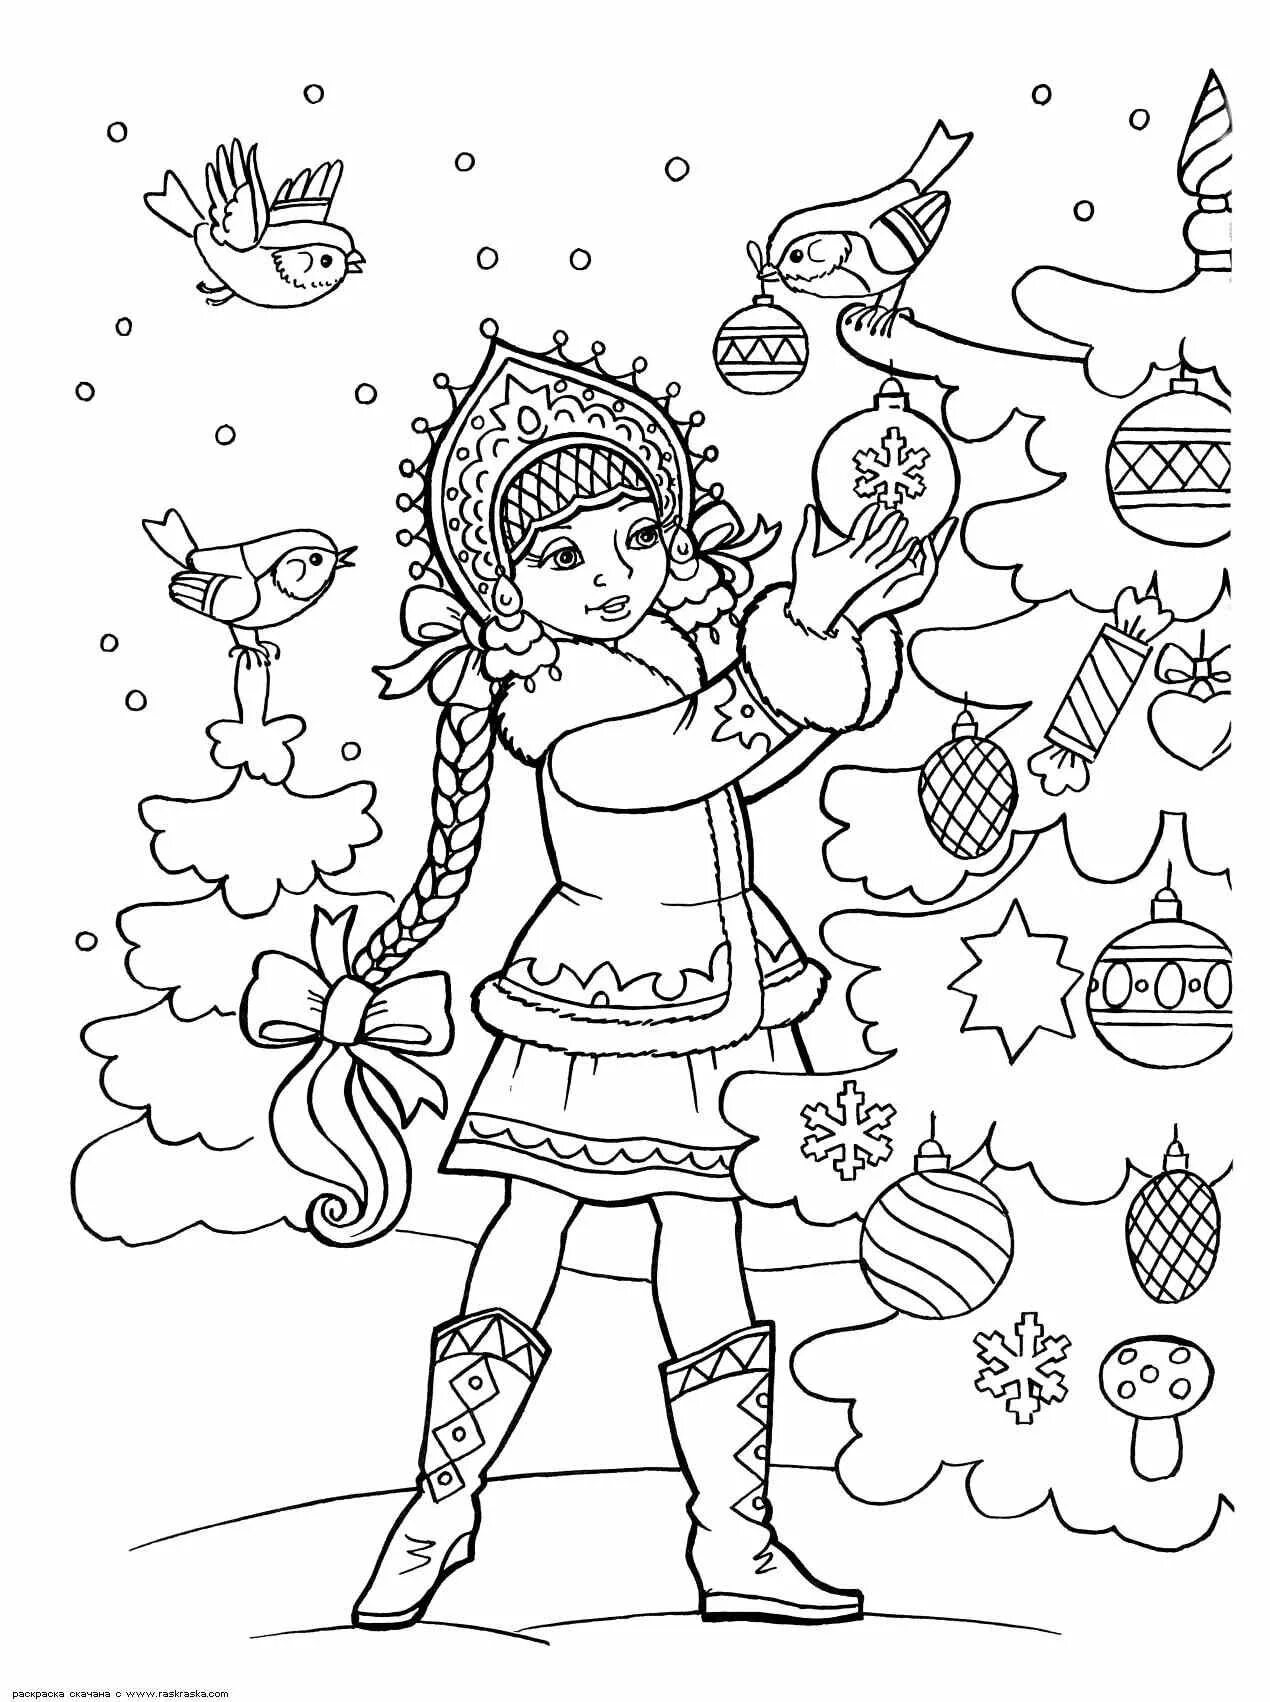 Amazing children's Christmas coloring book